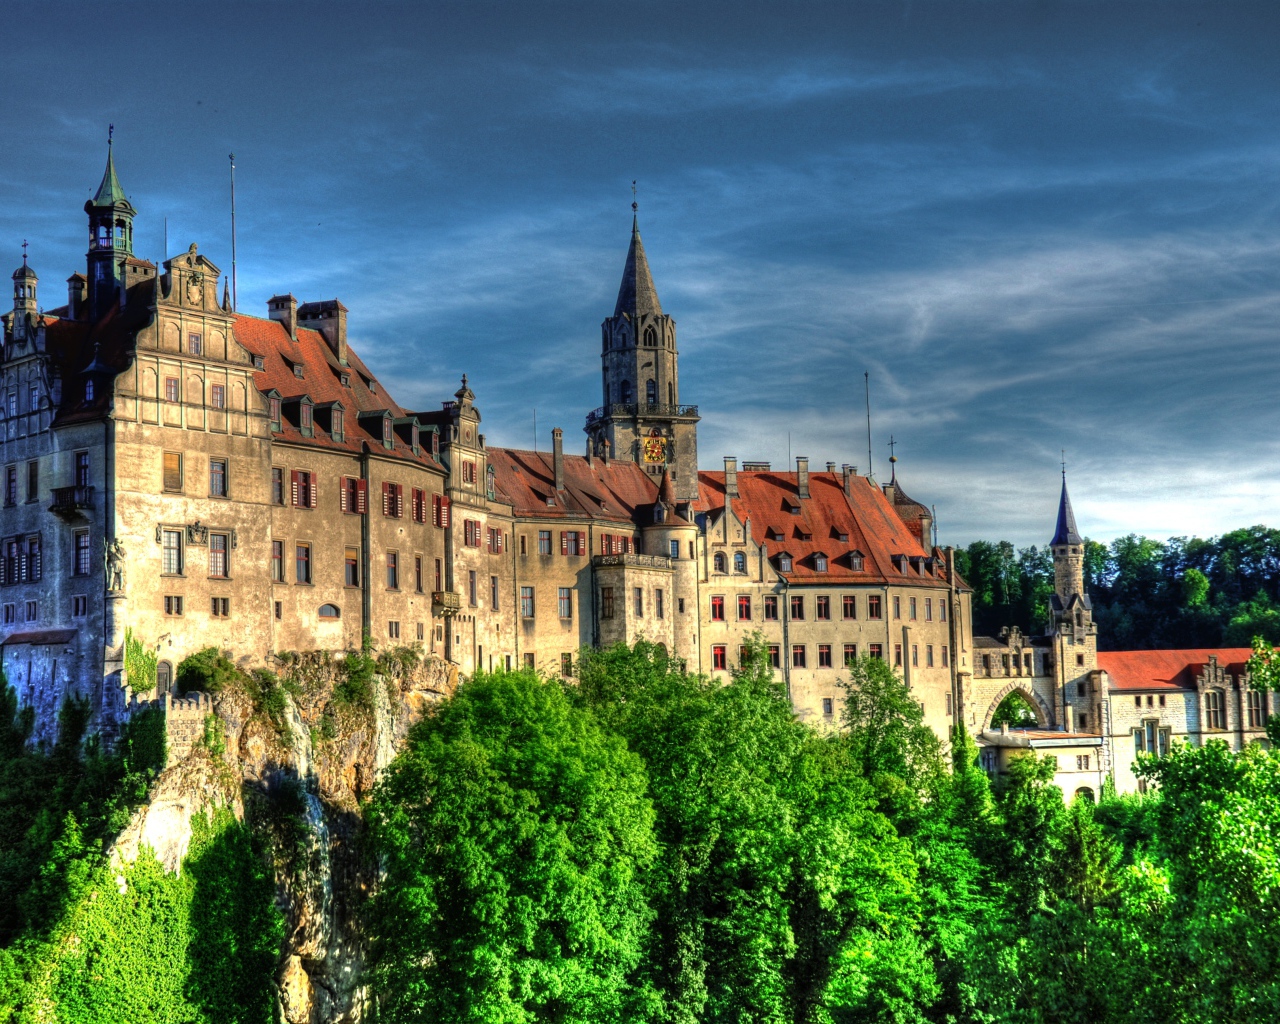 Ancient castle Sigmaringen against the sky, Germany